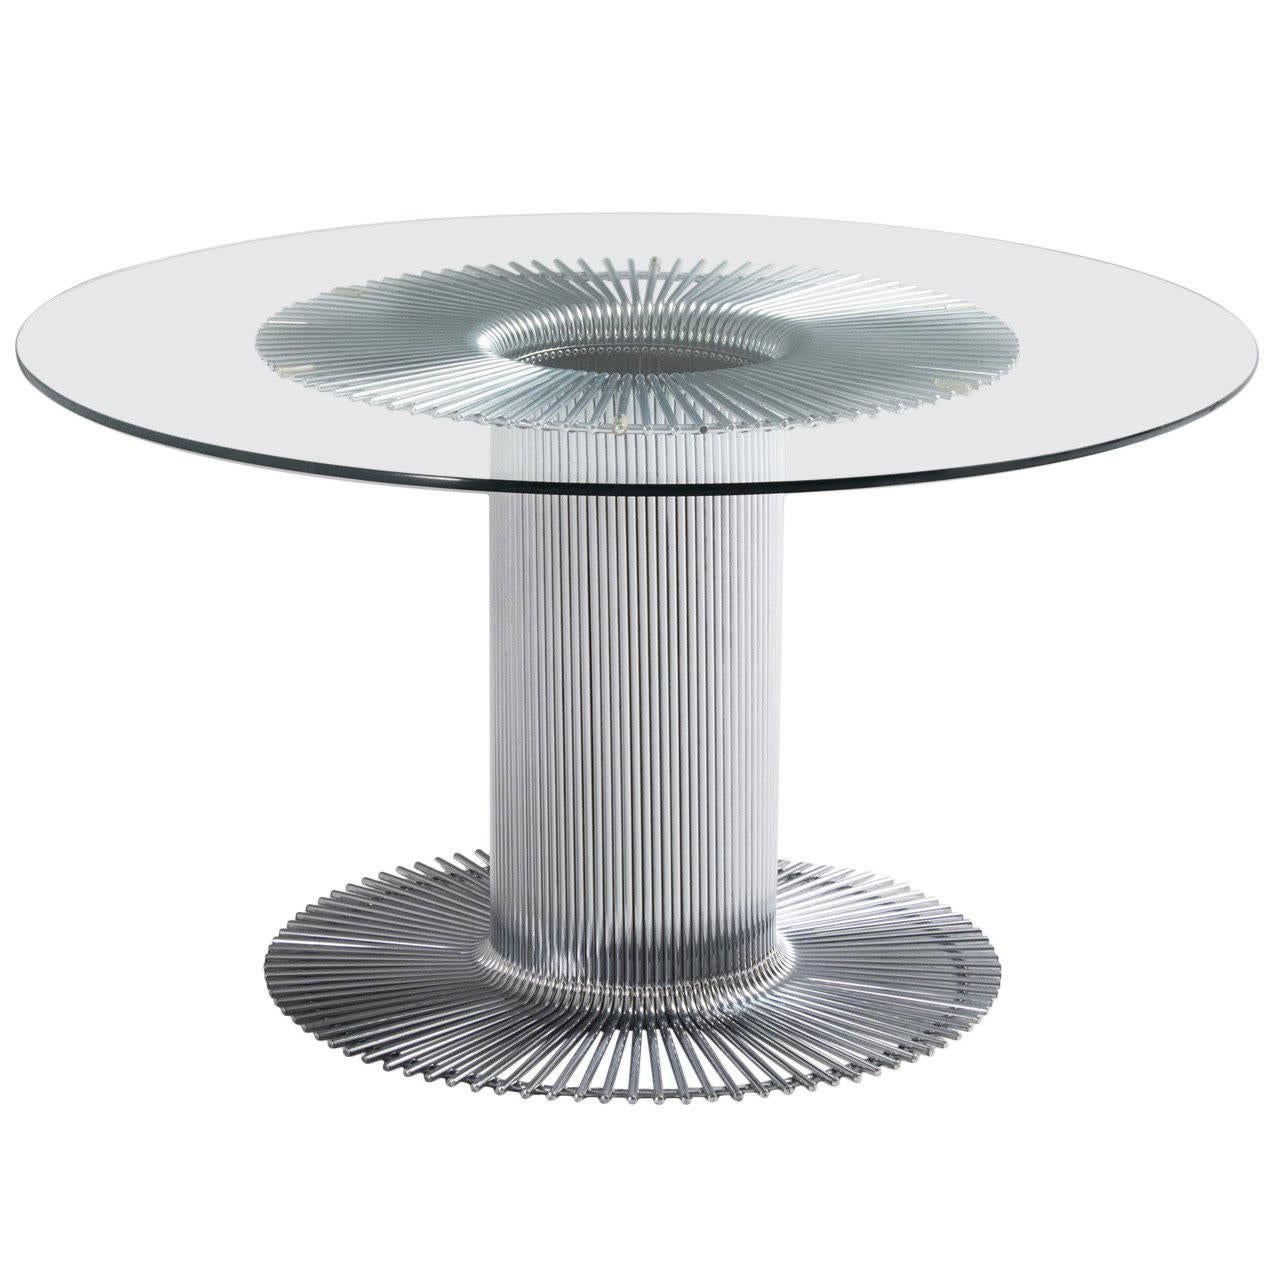 Italian Pedestal Dining Table in Chrome and Glass